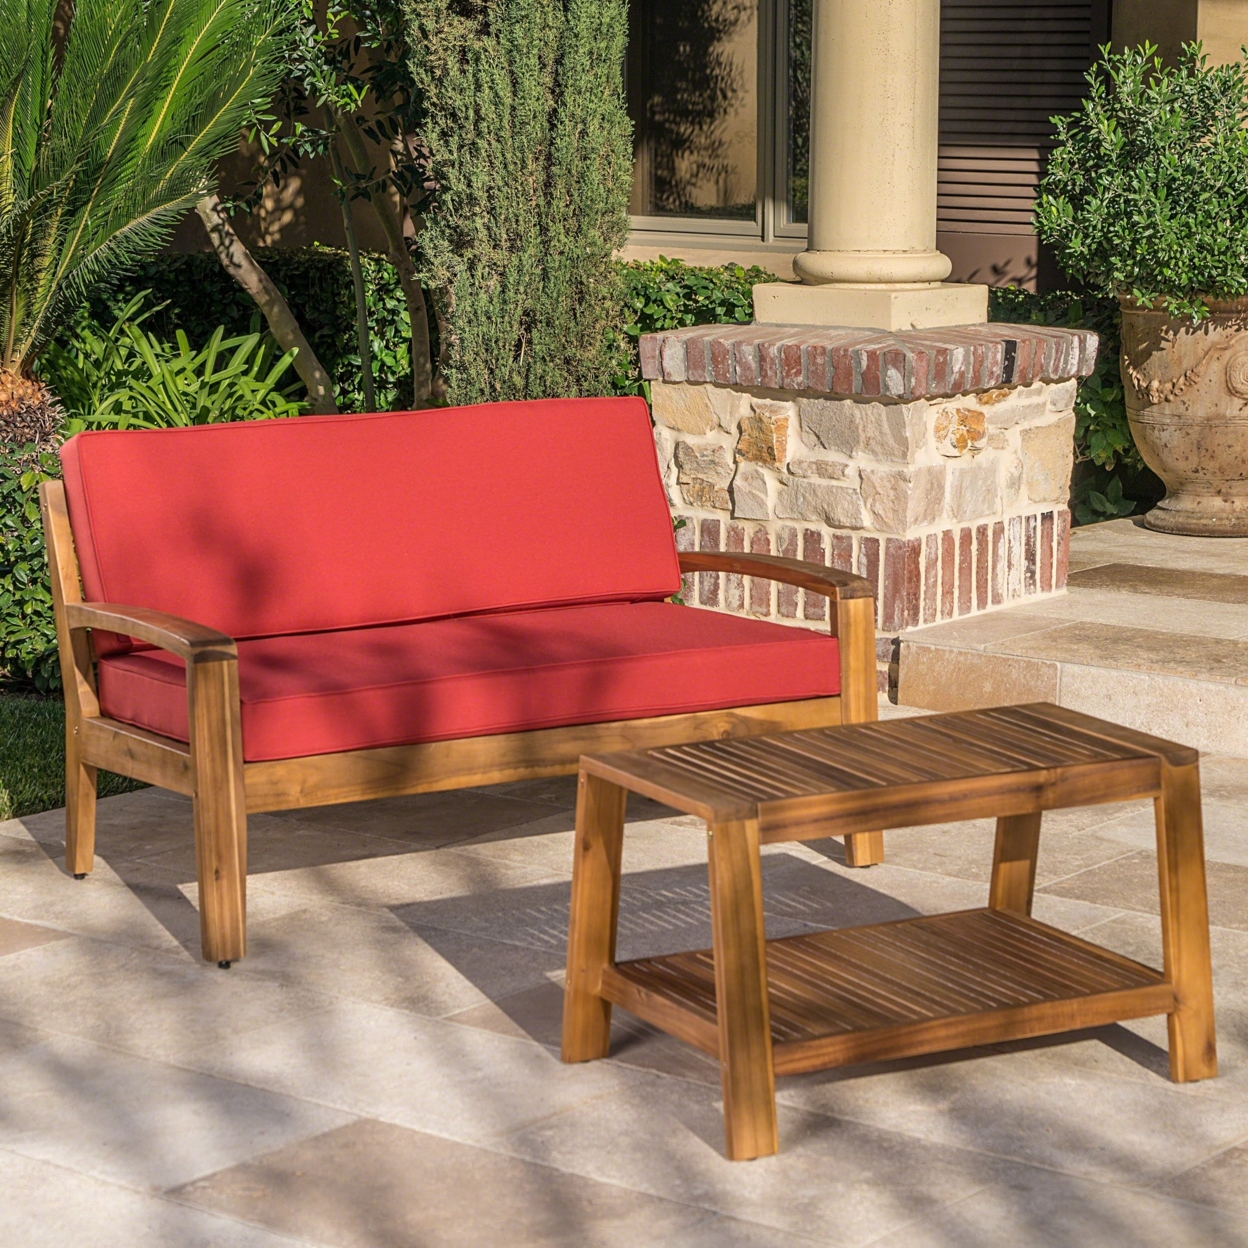 Christian Outdoor Acacia Wood Loveseat And Coffee Table Set With Cushions - Teak Finish/red